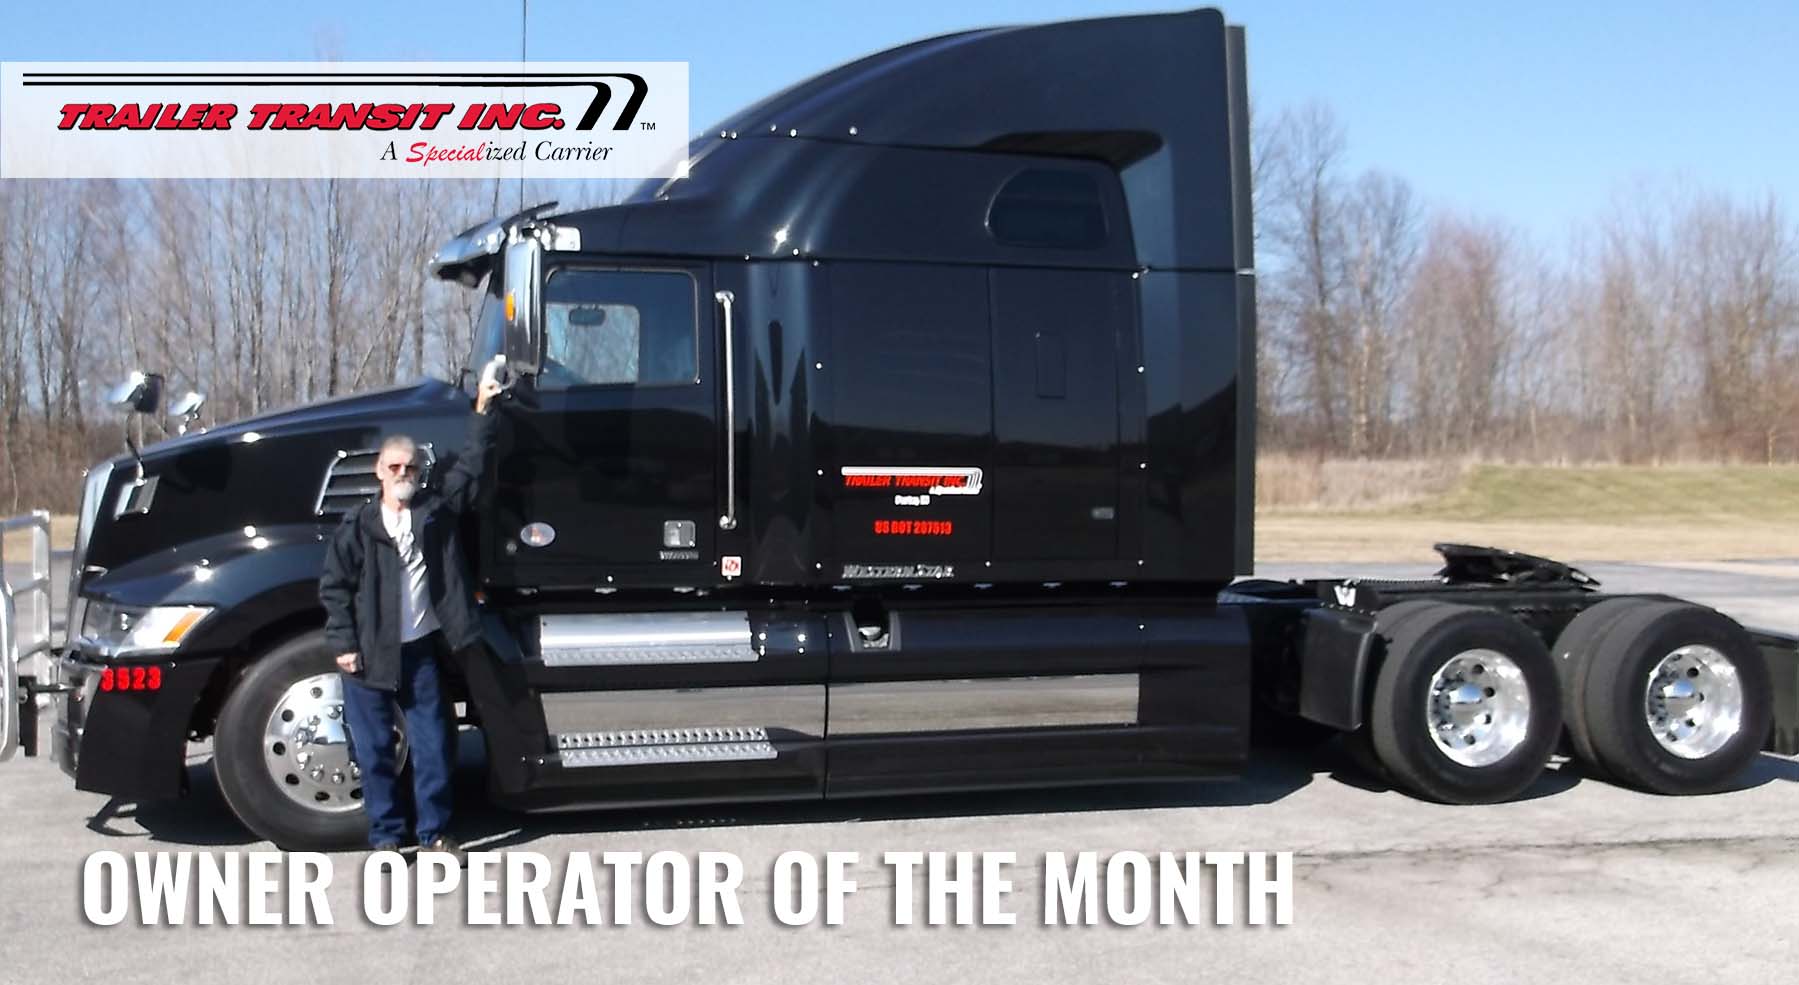 Trailer Transit Inc. Owner Operator of the Month for October 2020